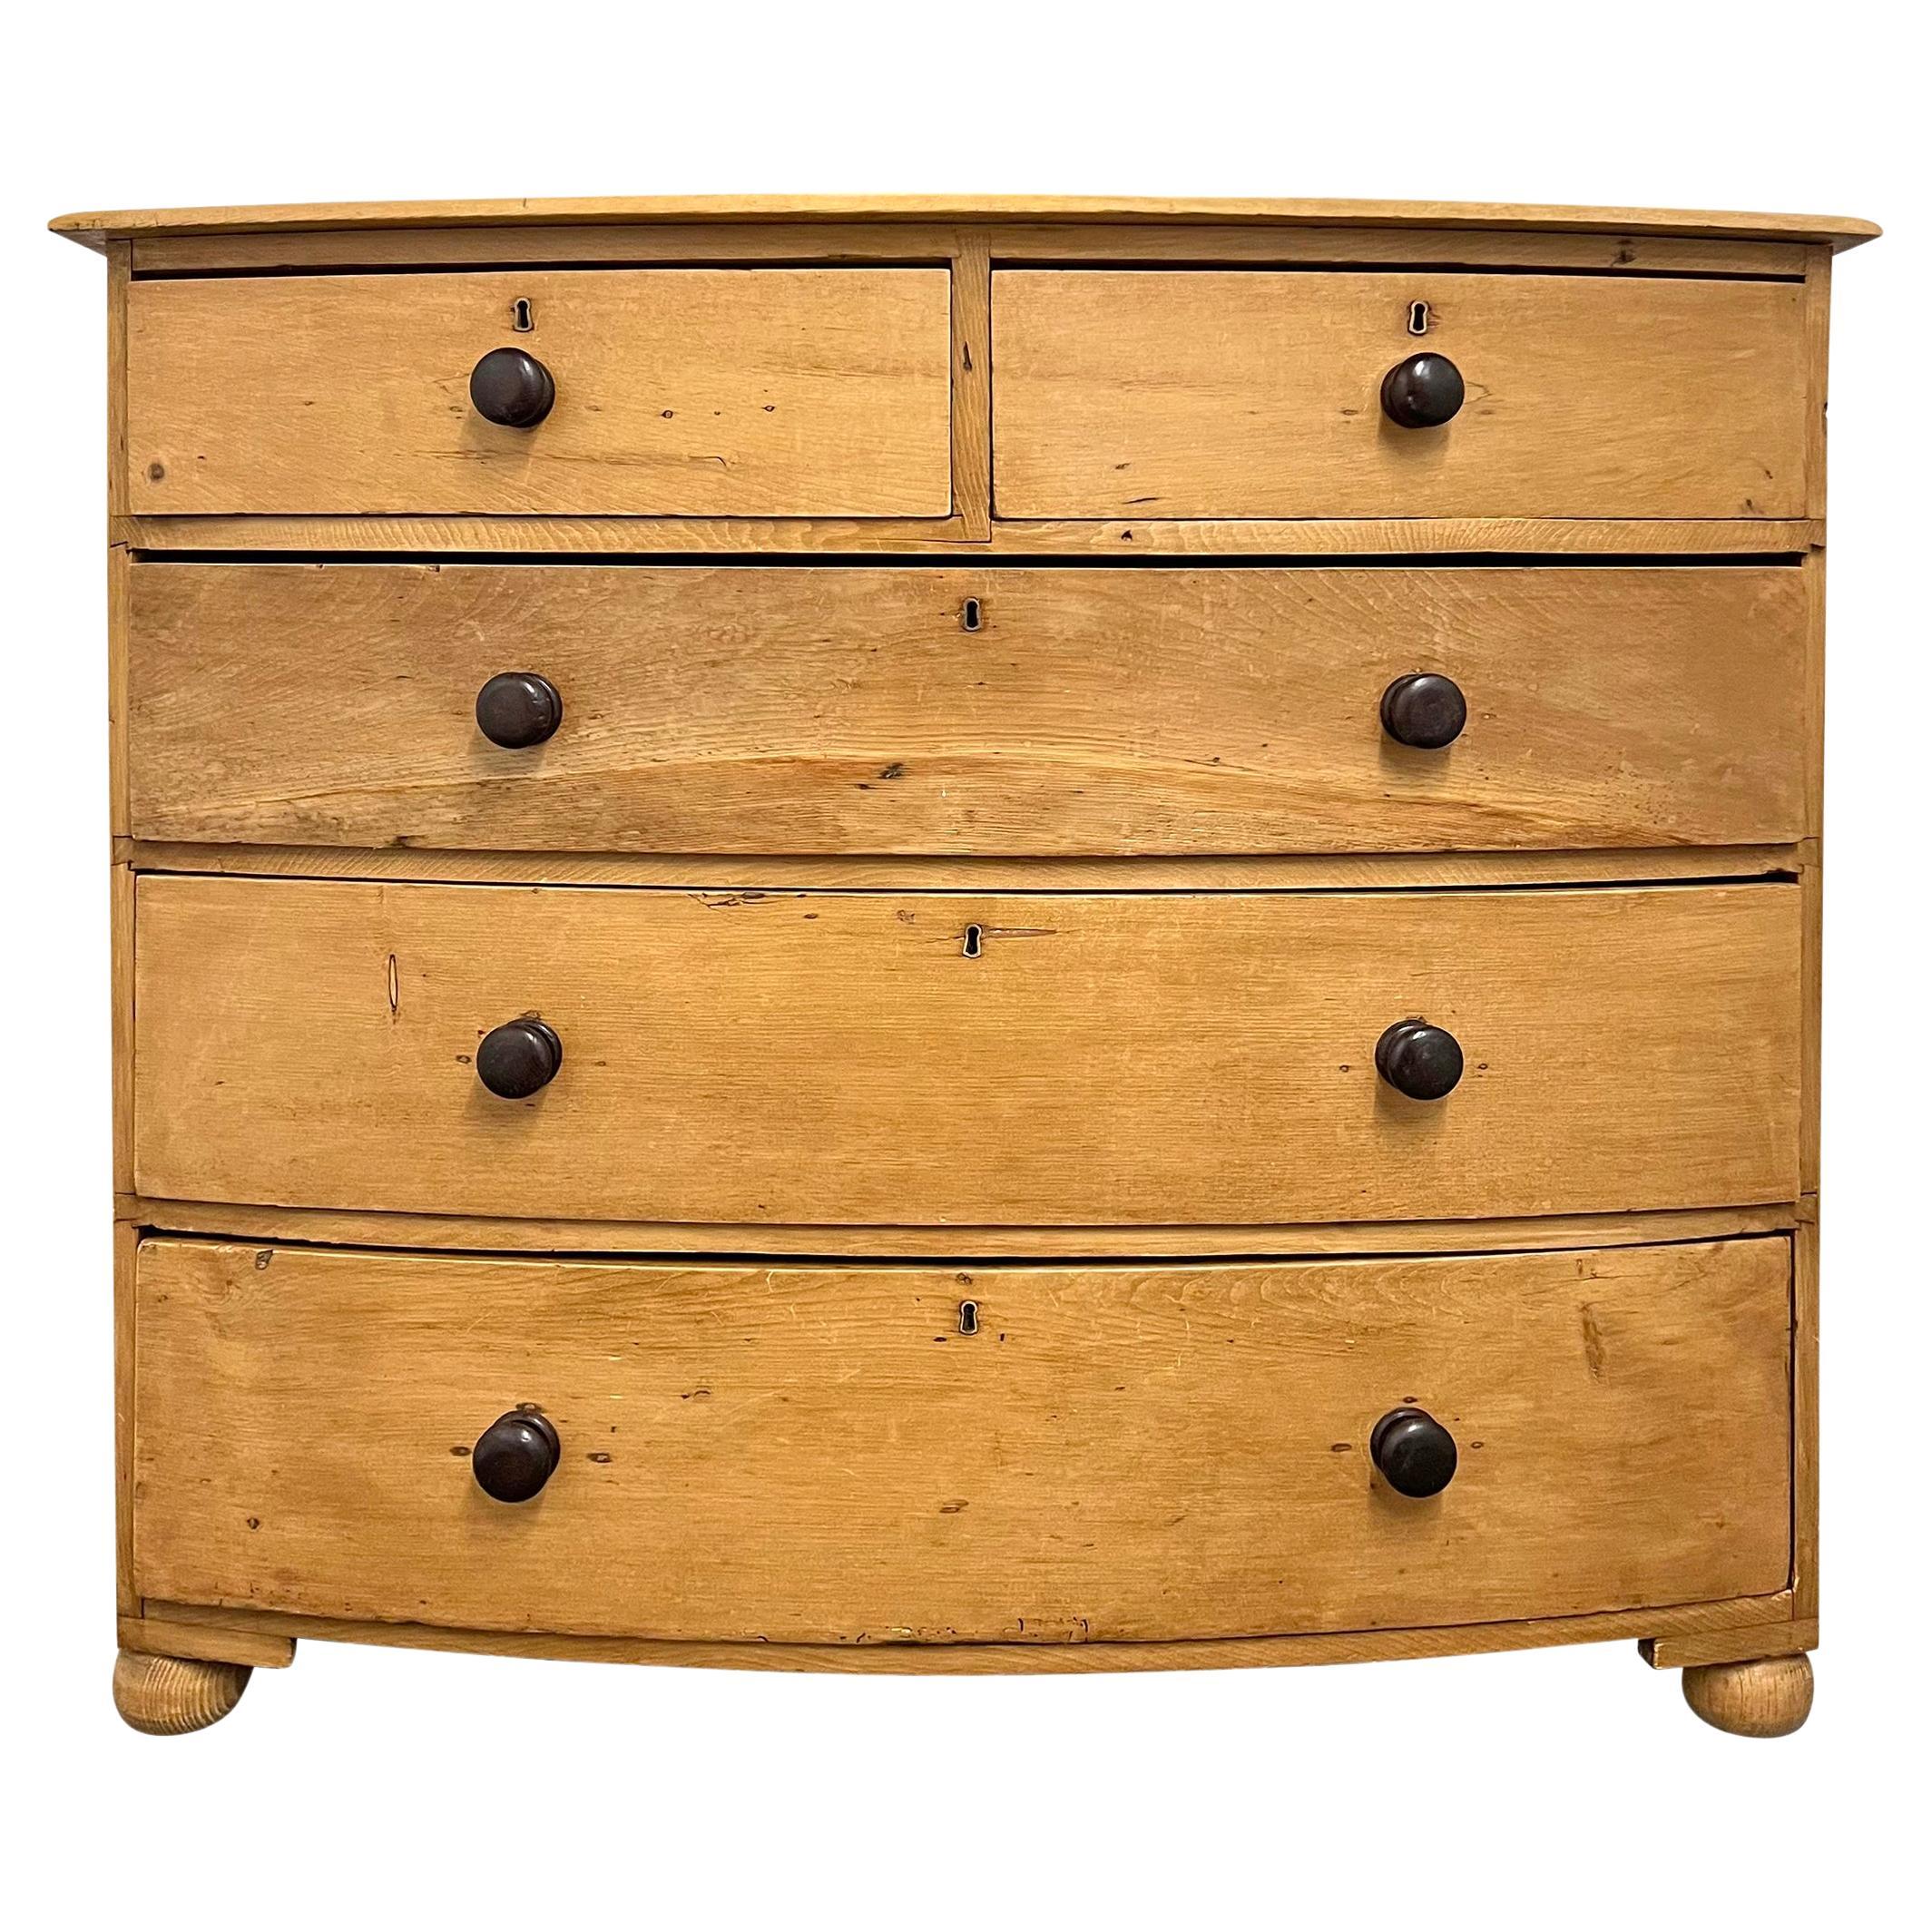 19th Century English Bow-Front Chest of Drawers For Sale